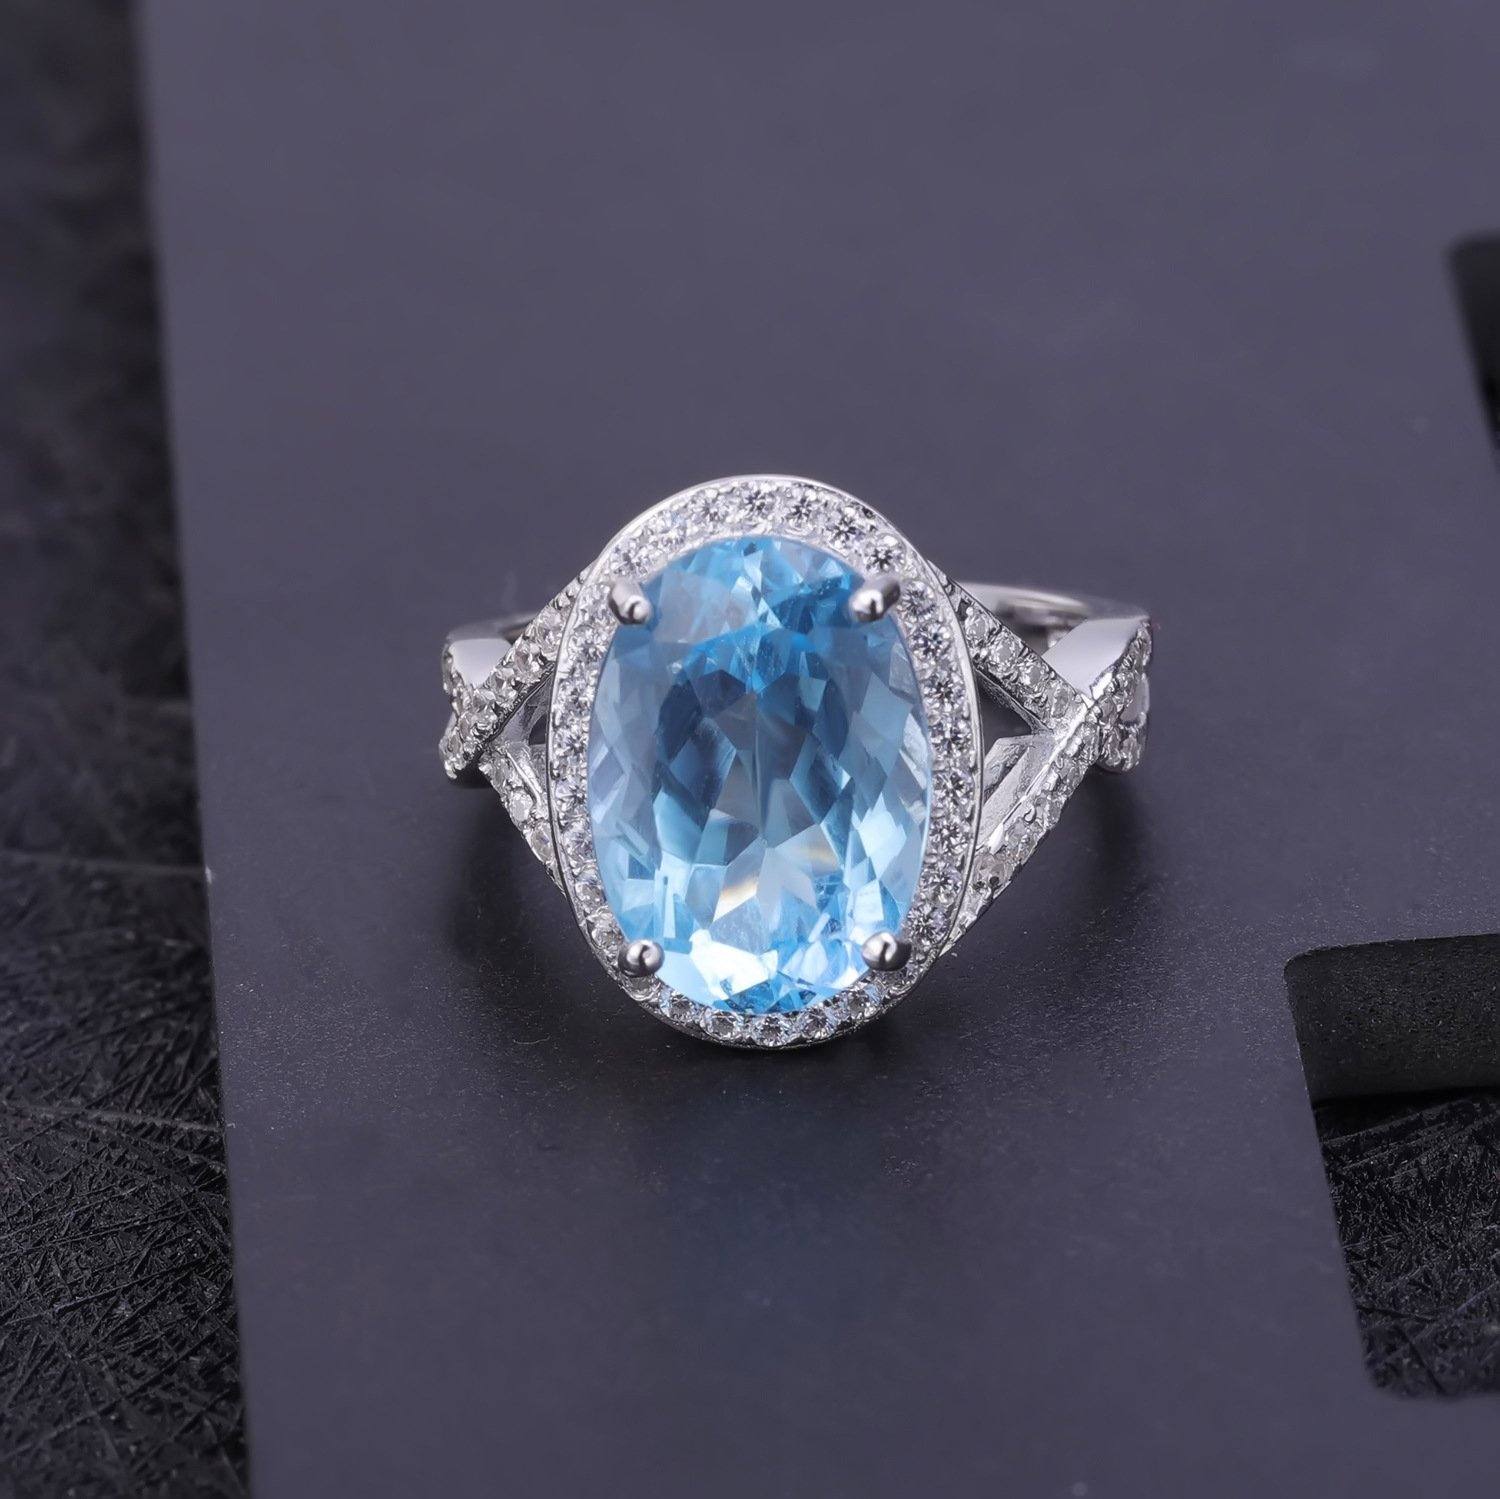 Blue Topaz Engagement Ring - HERS